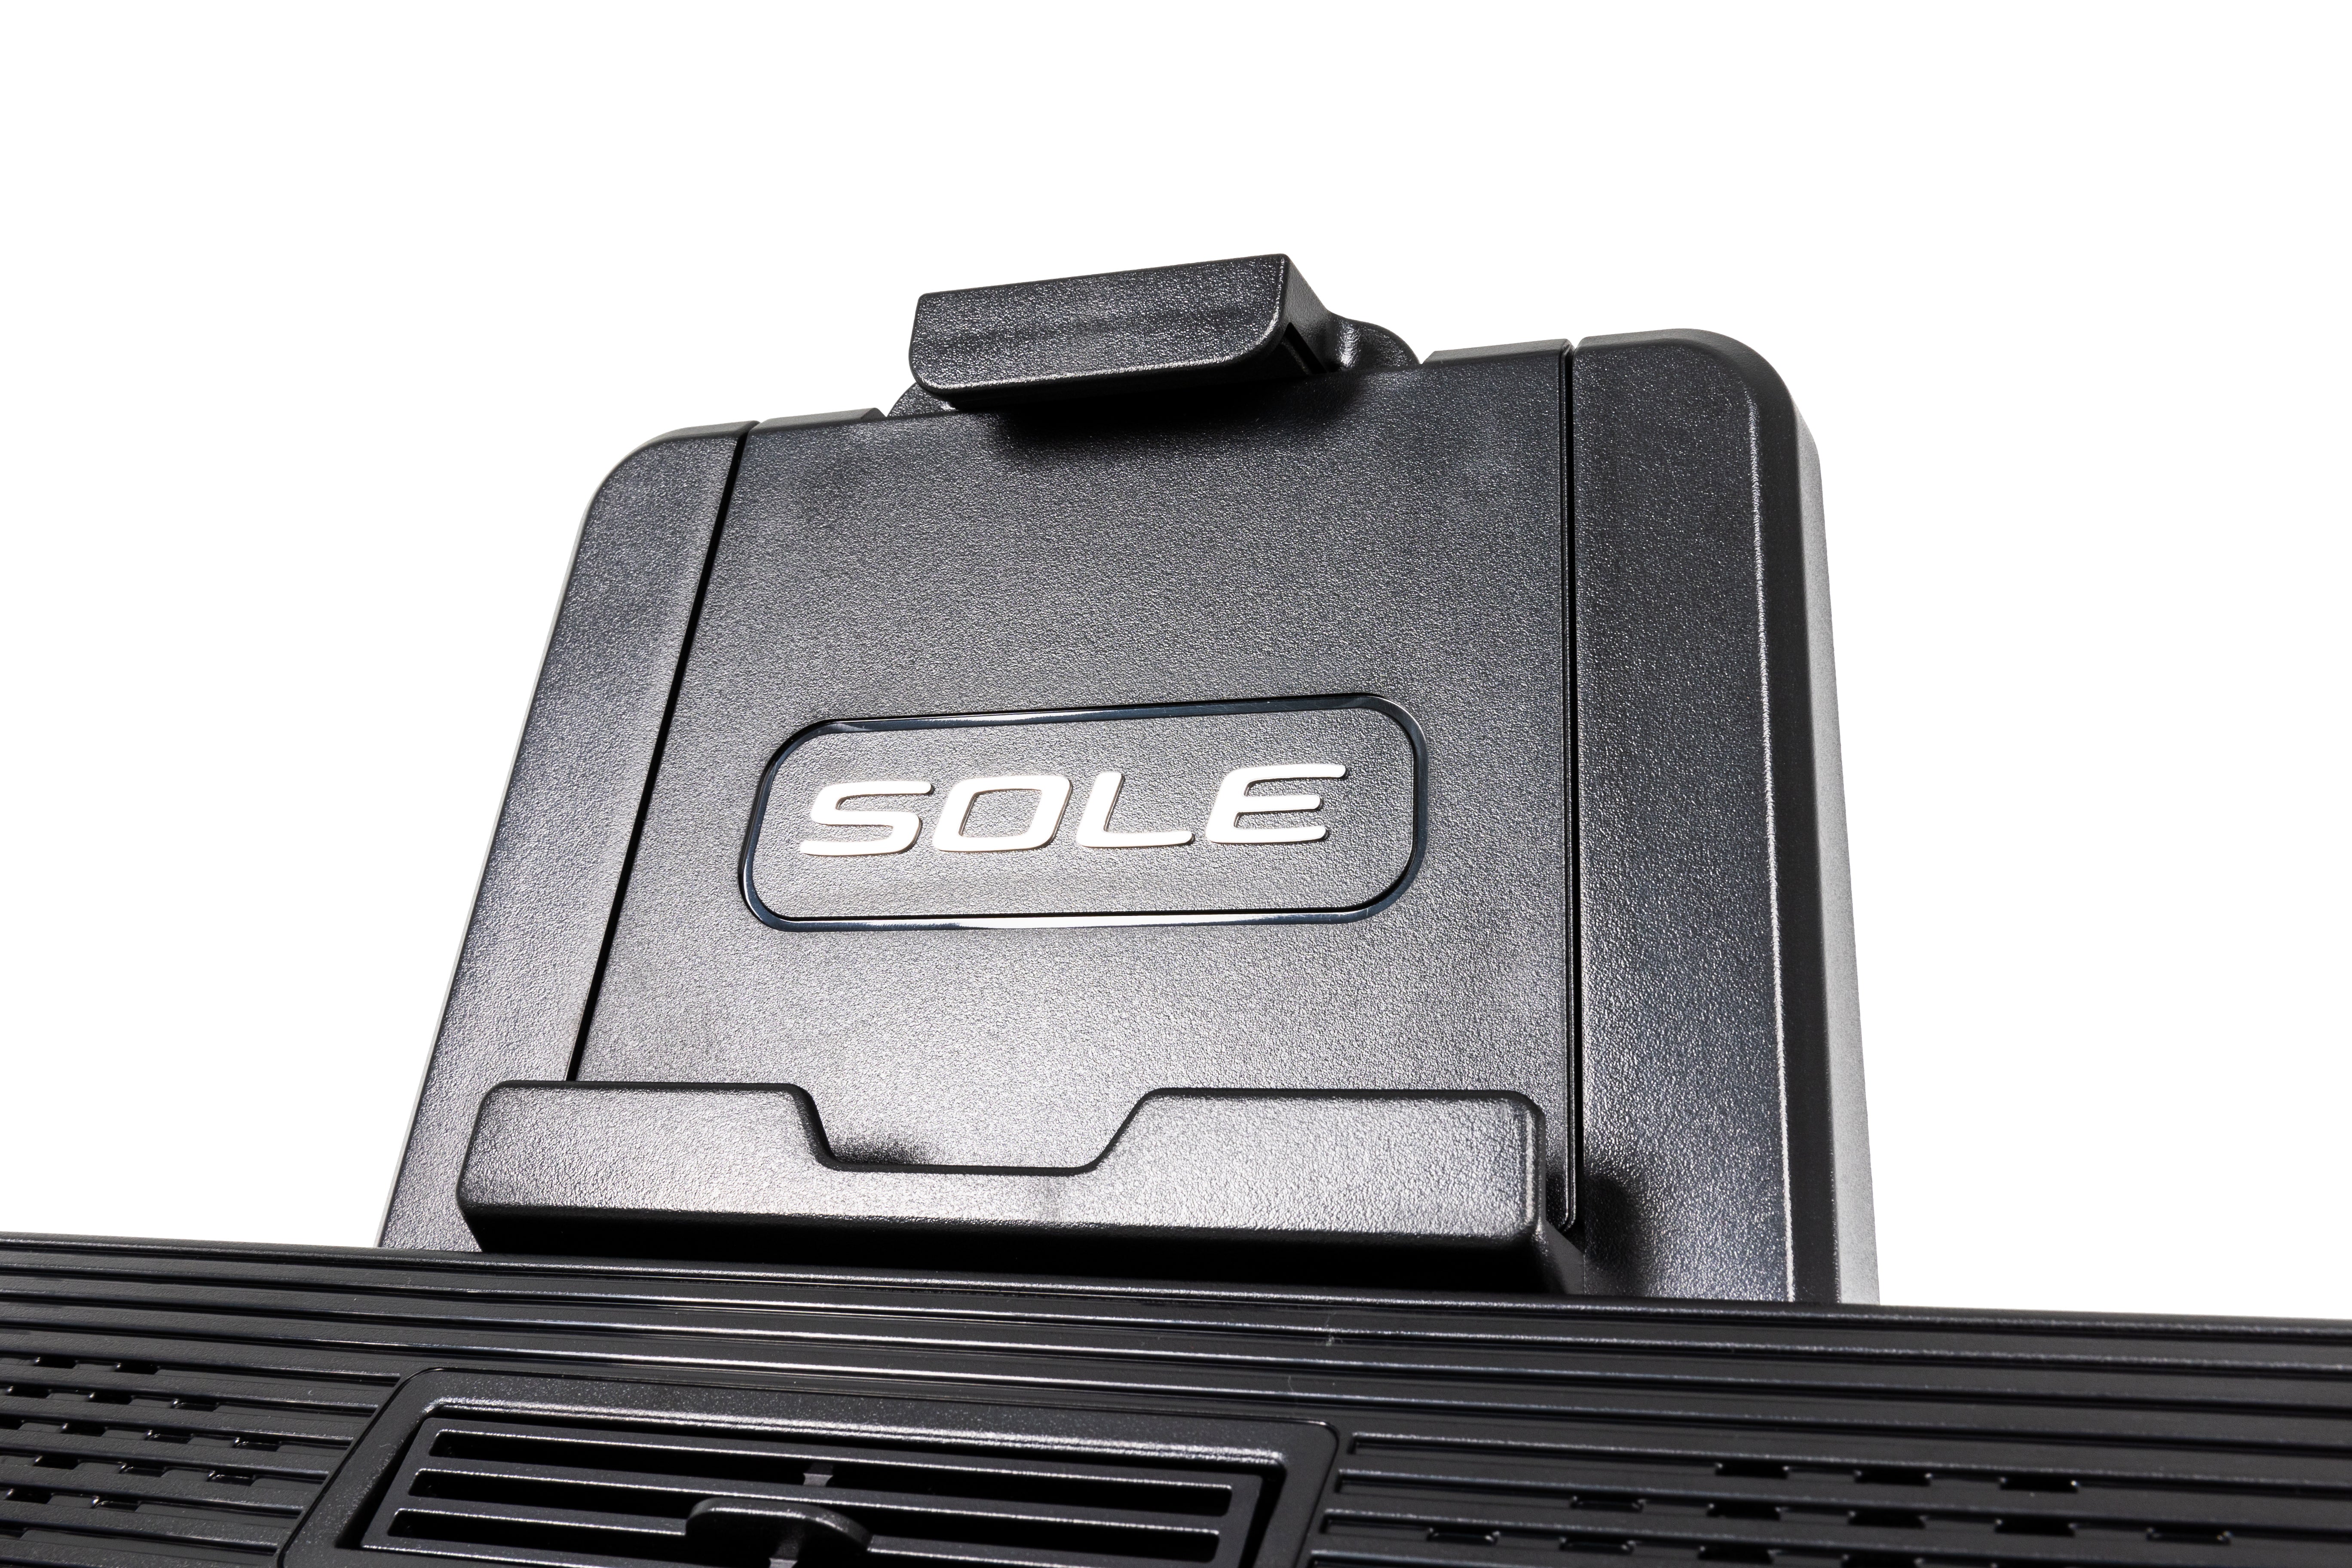 Detailed view of the Sole E95S elliptical machine's textured base with the embossed "SOLE" logo, showcasing its sturdy construction and vented design.